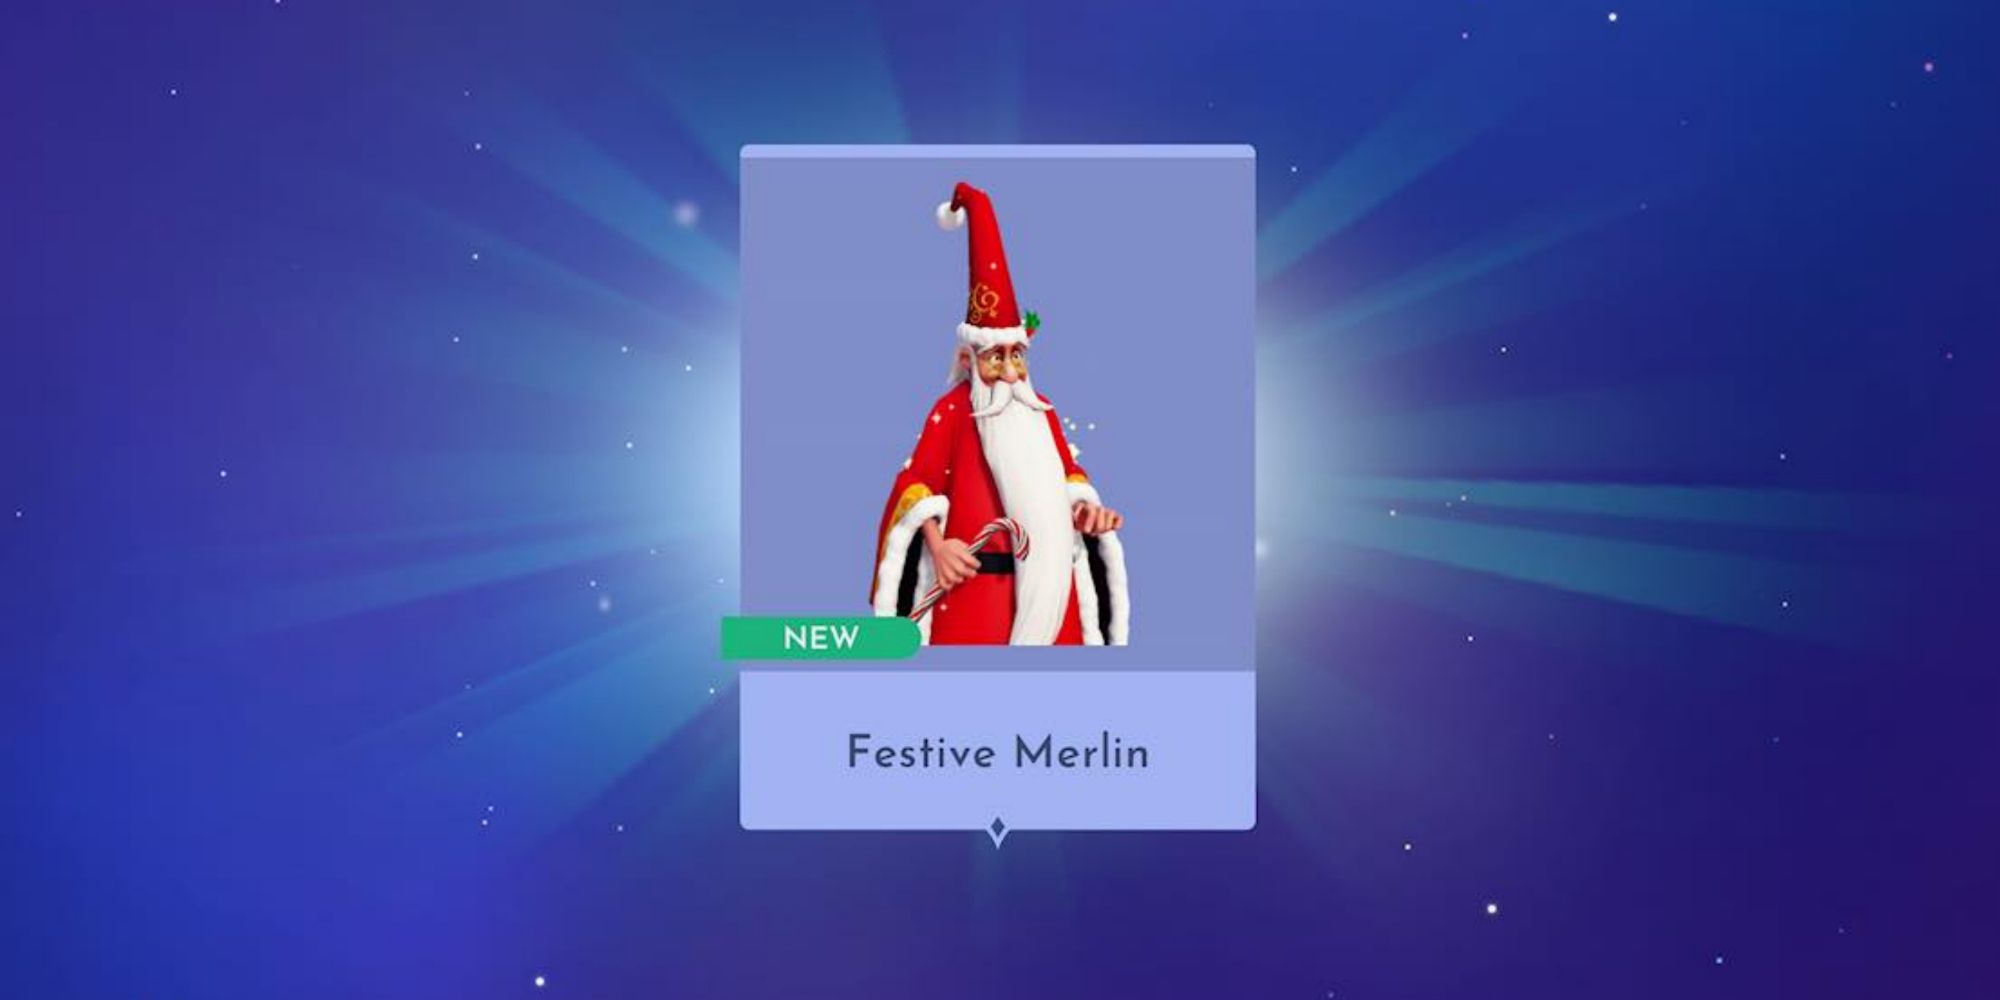 Get a Festive Merlin with Star Pass